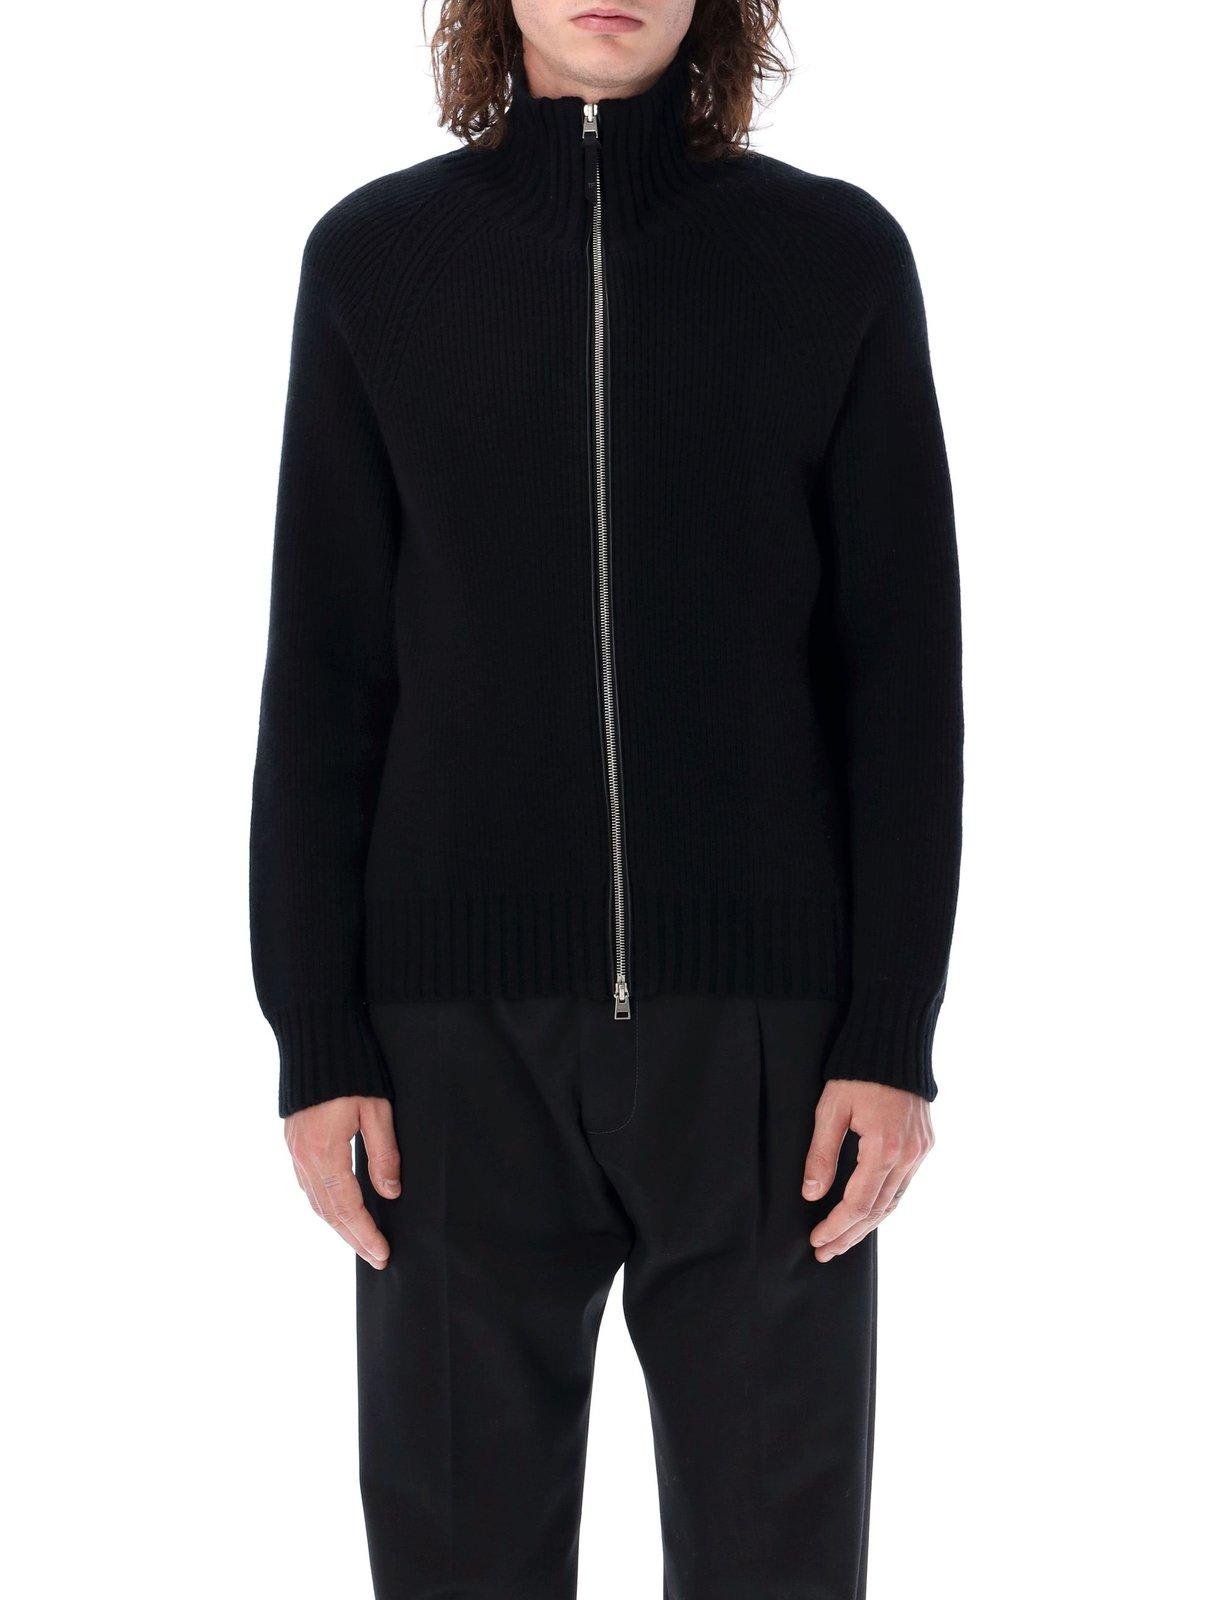 TOM FORD ZIP-UP LONG-SLEEVED CARDIGAN